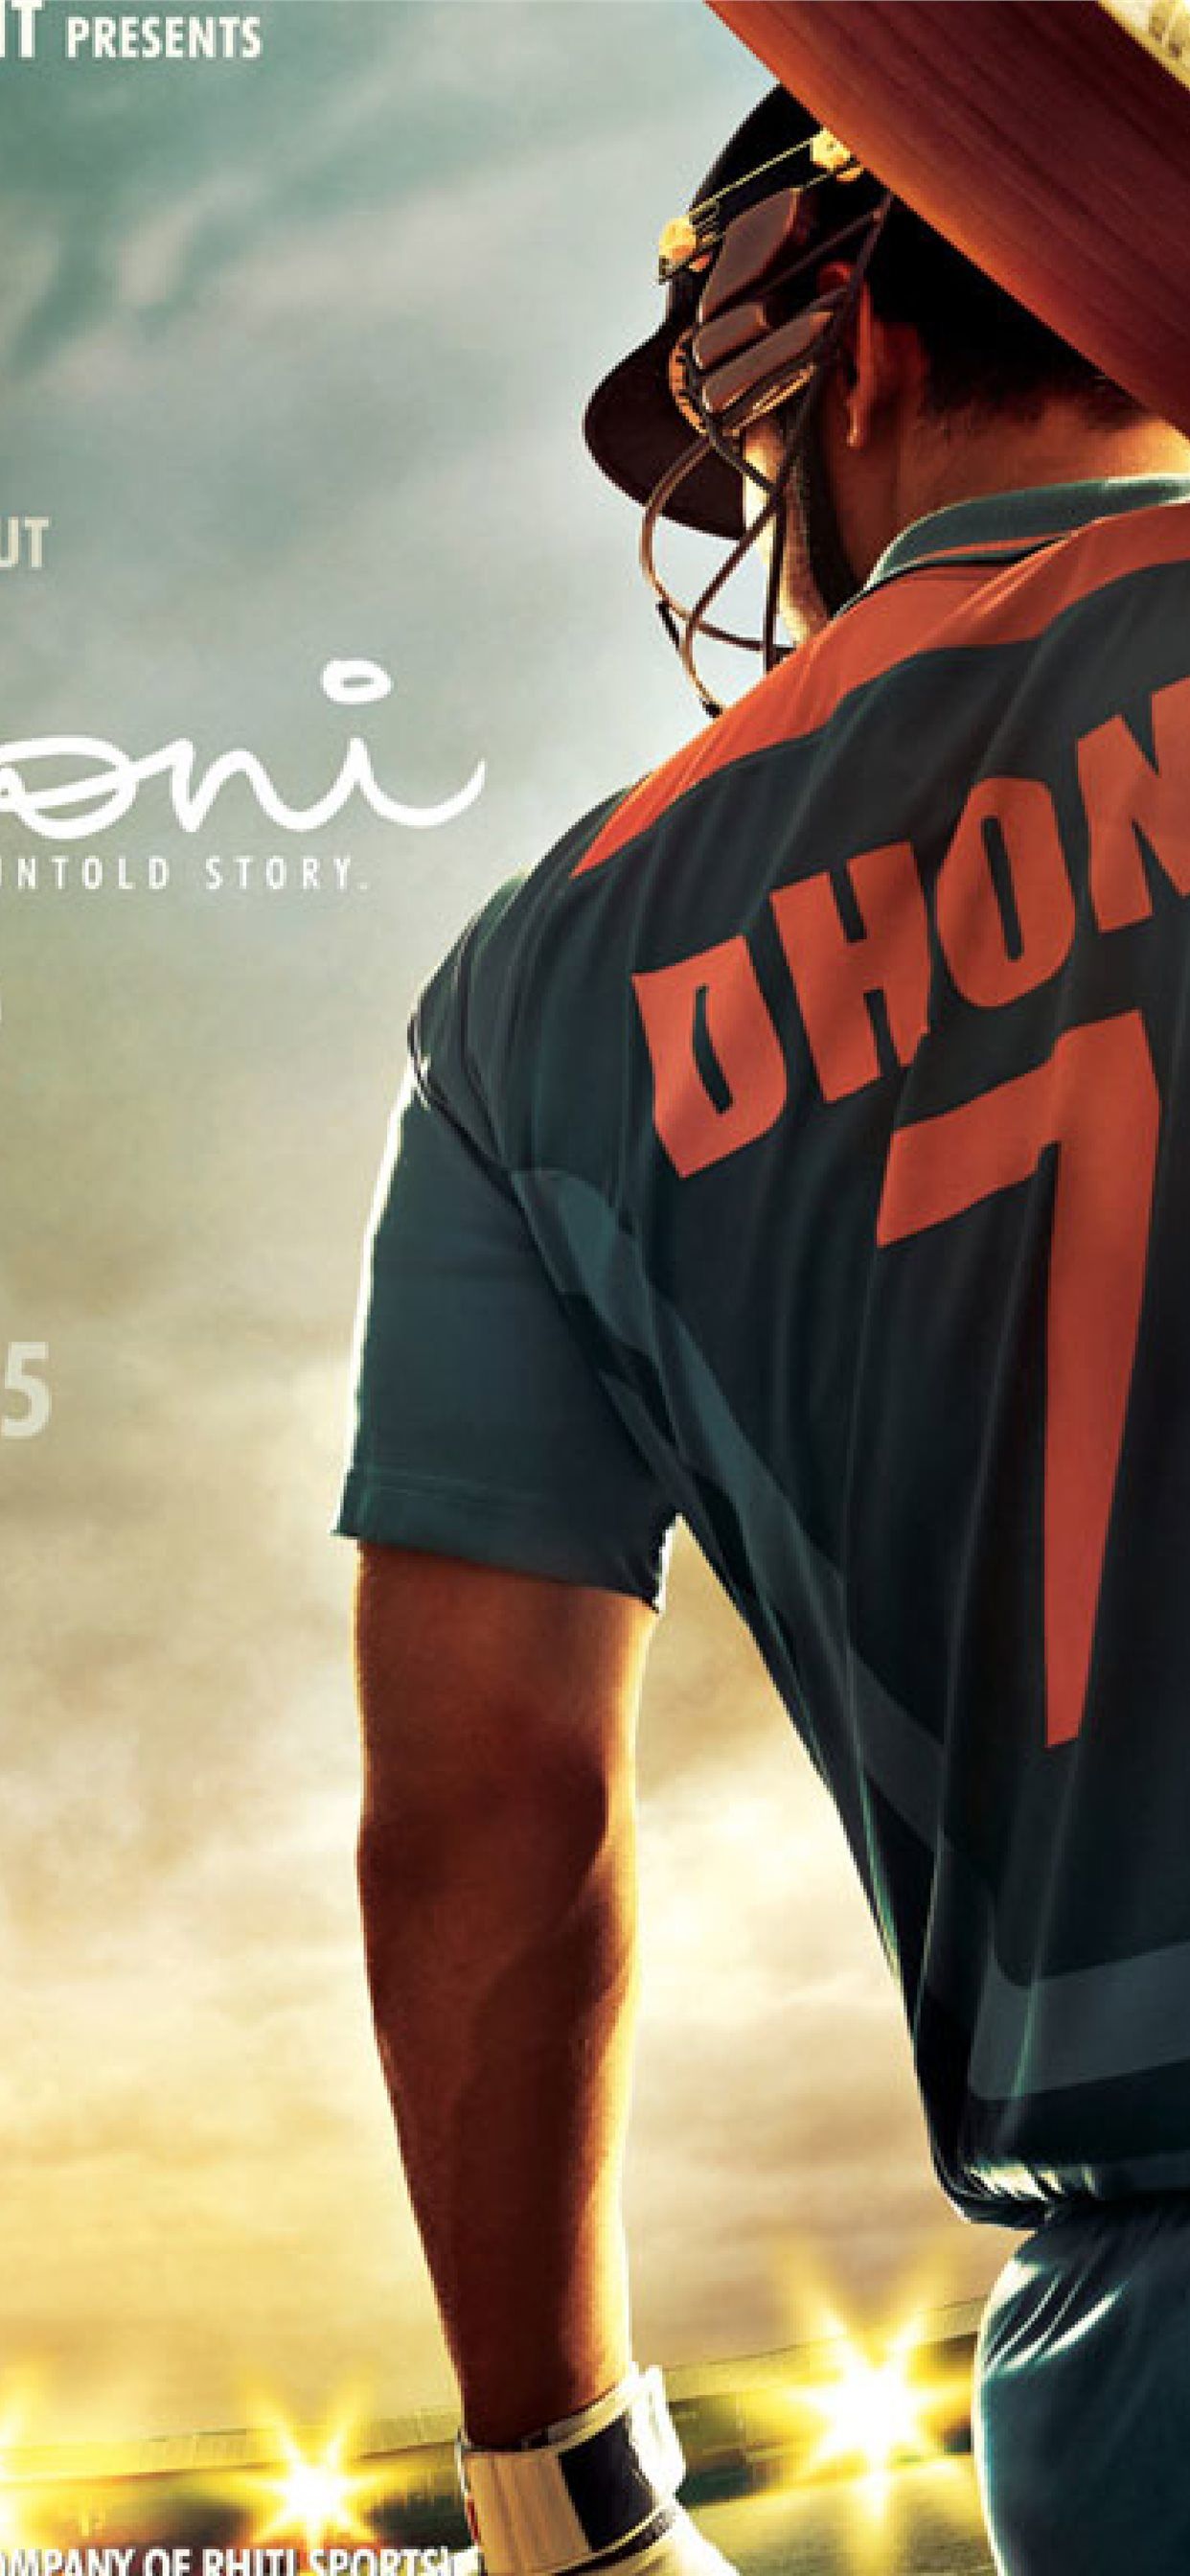 MS Dhoni Untold Story Poster Sony Xperia X XZ Z5 P. iPhone